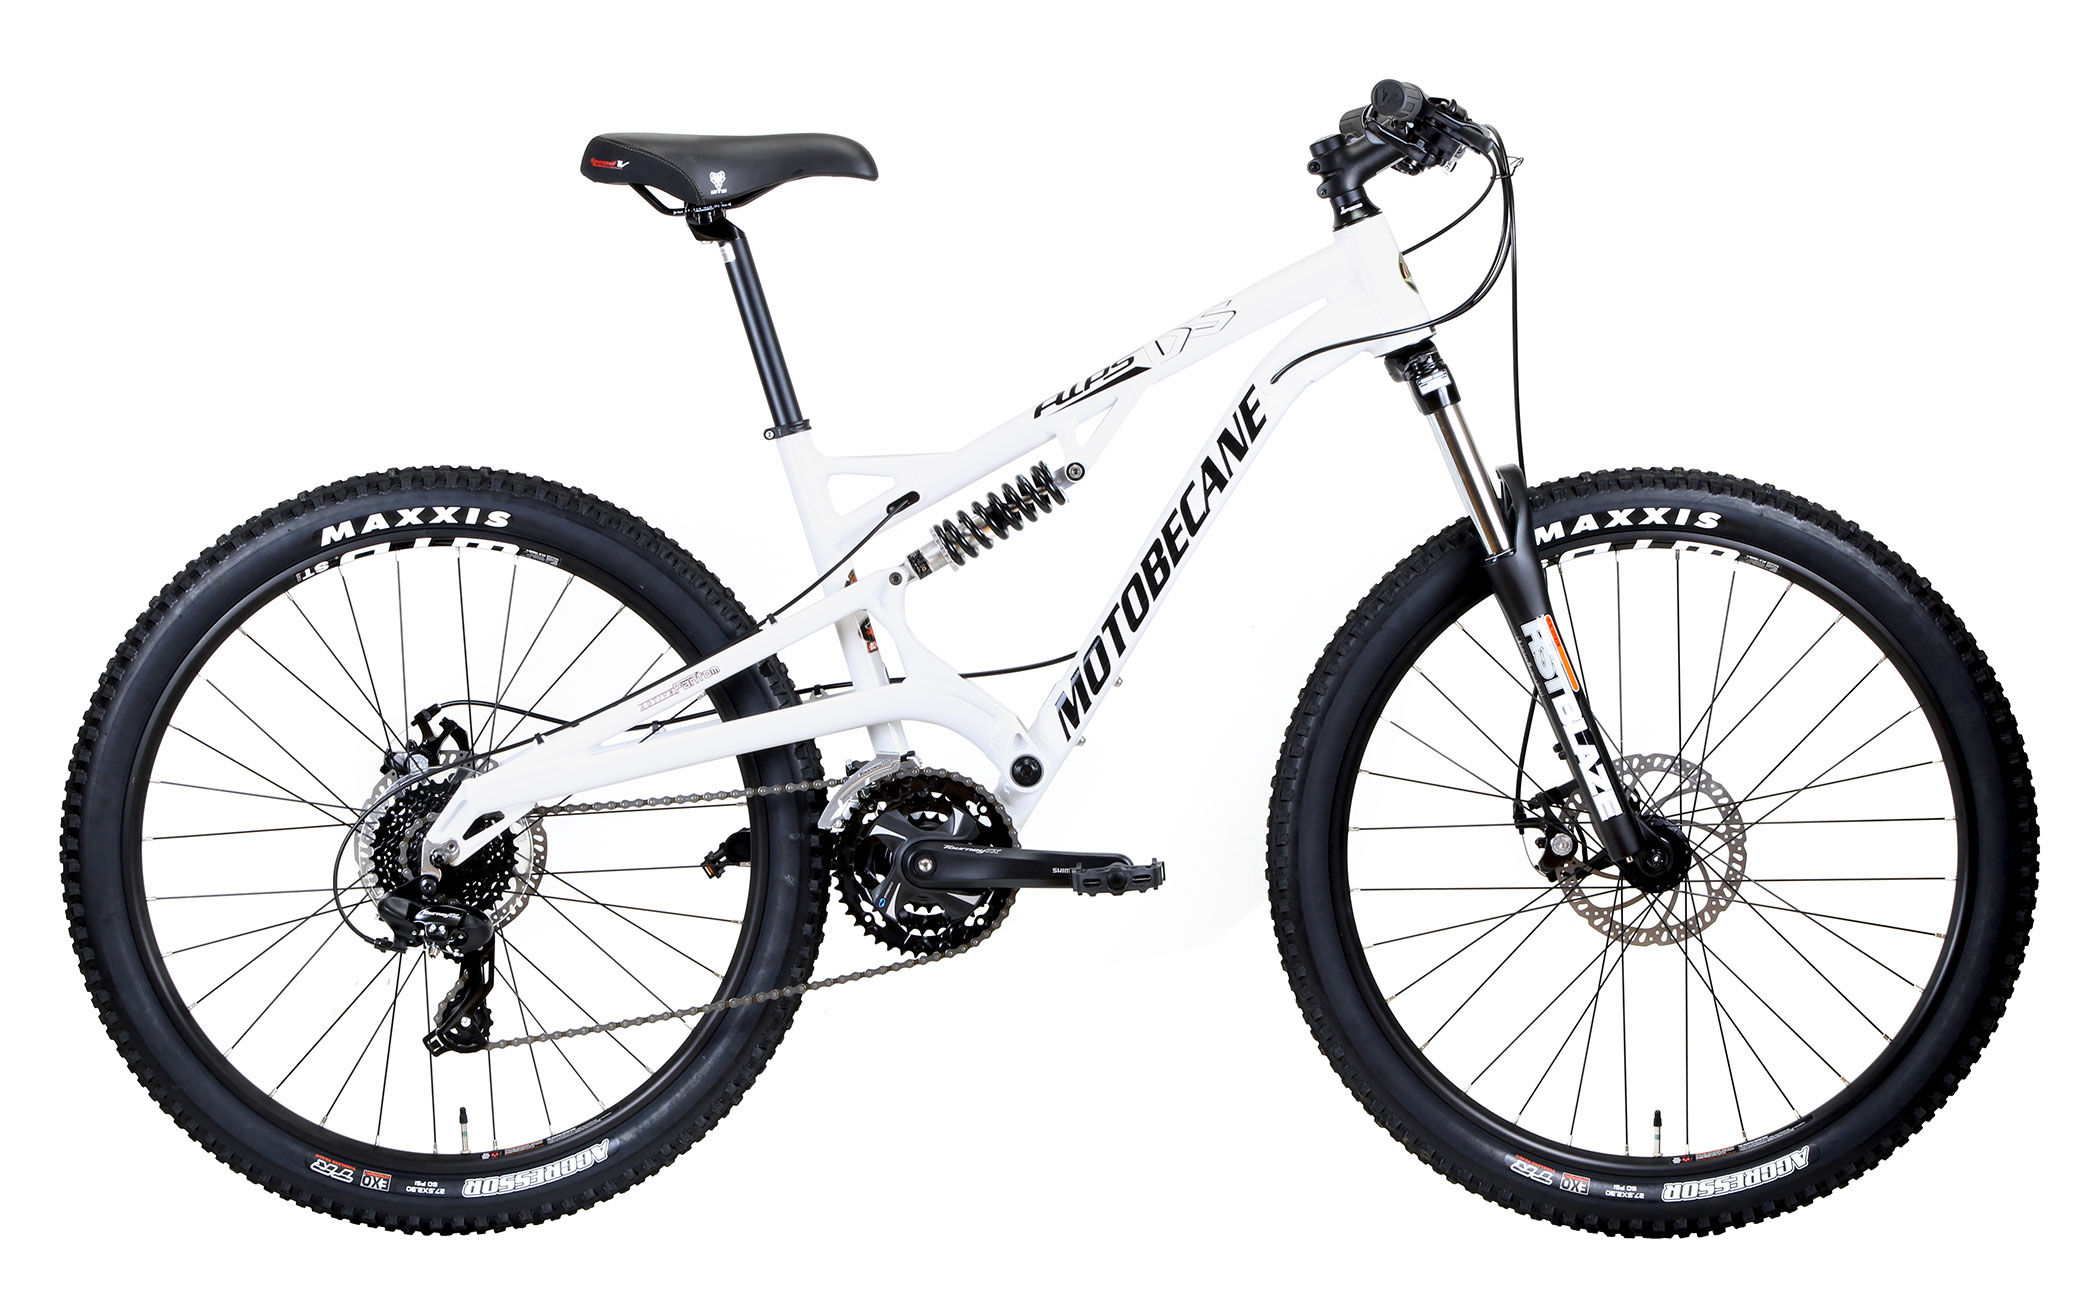 Save up to 60% off new Mountain Bikes